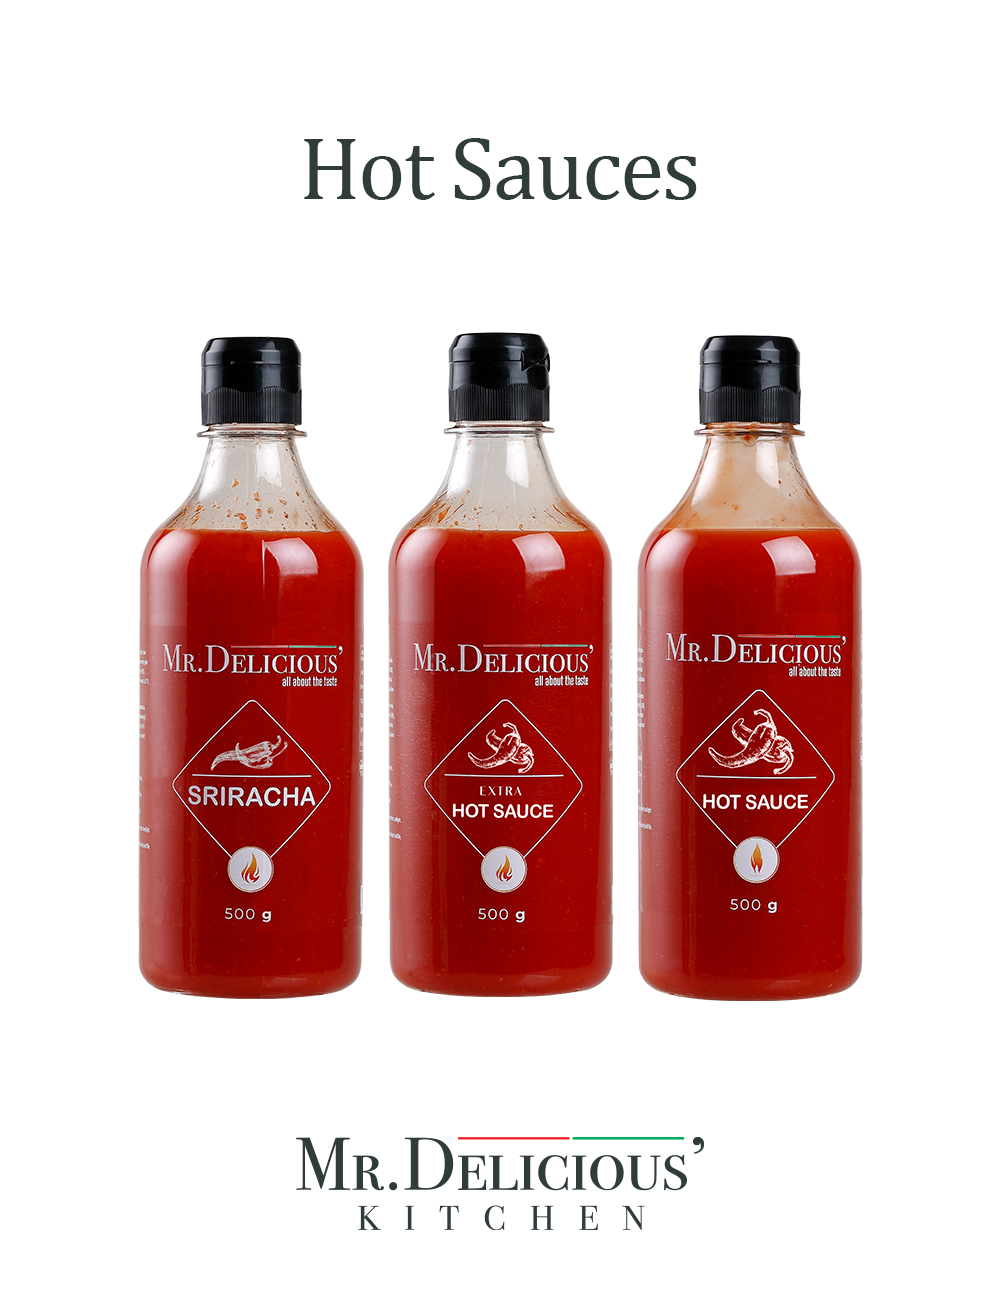  Sauces and Salad Dressings